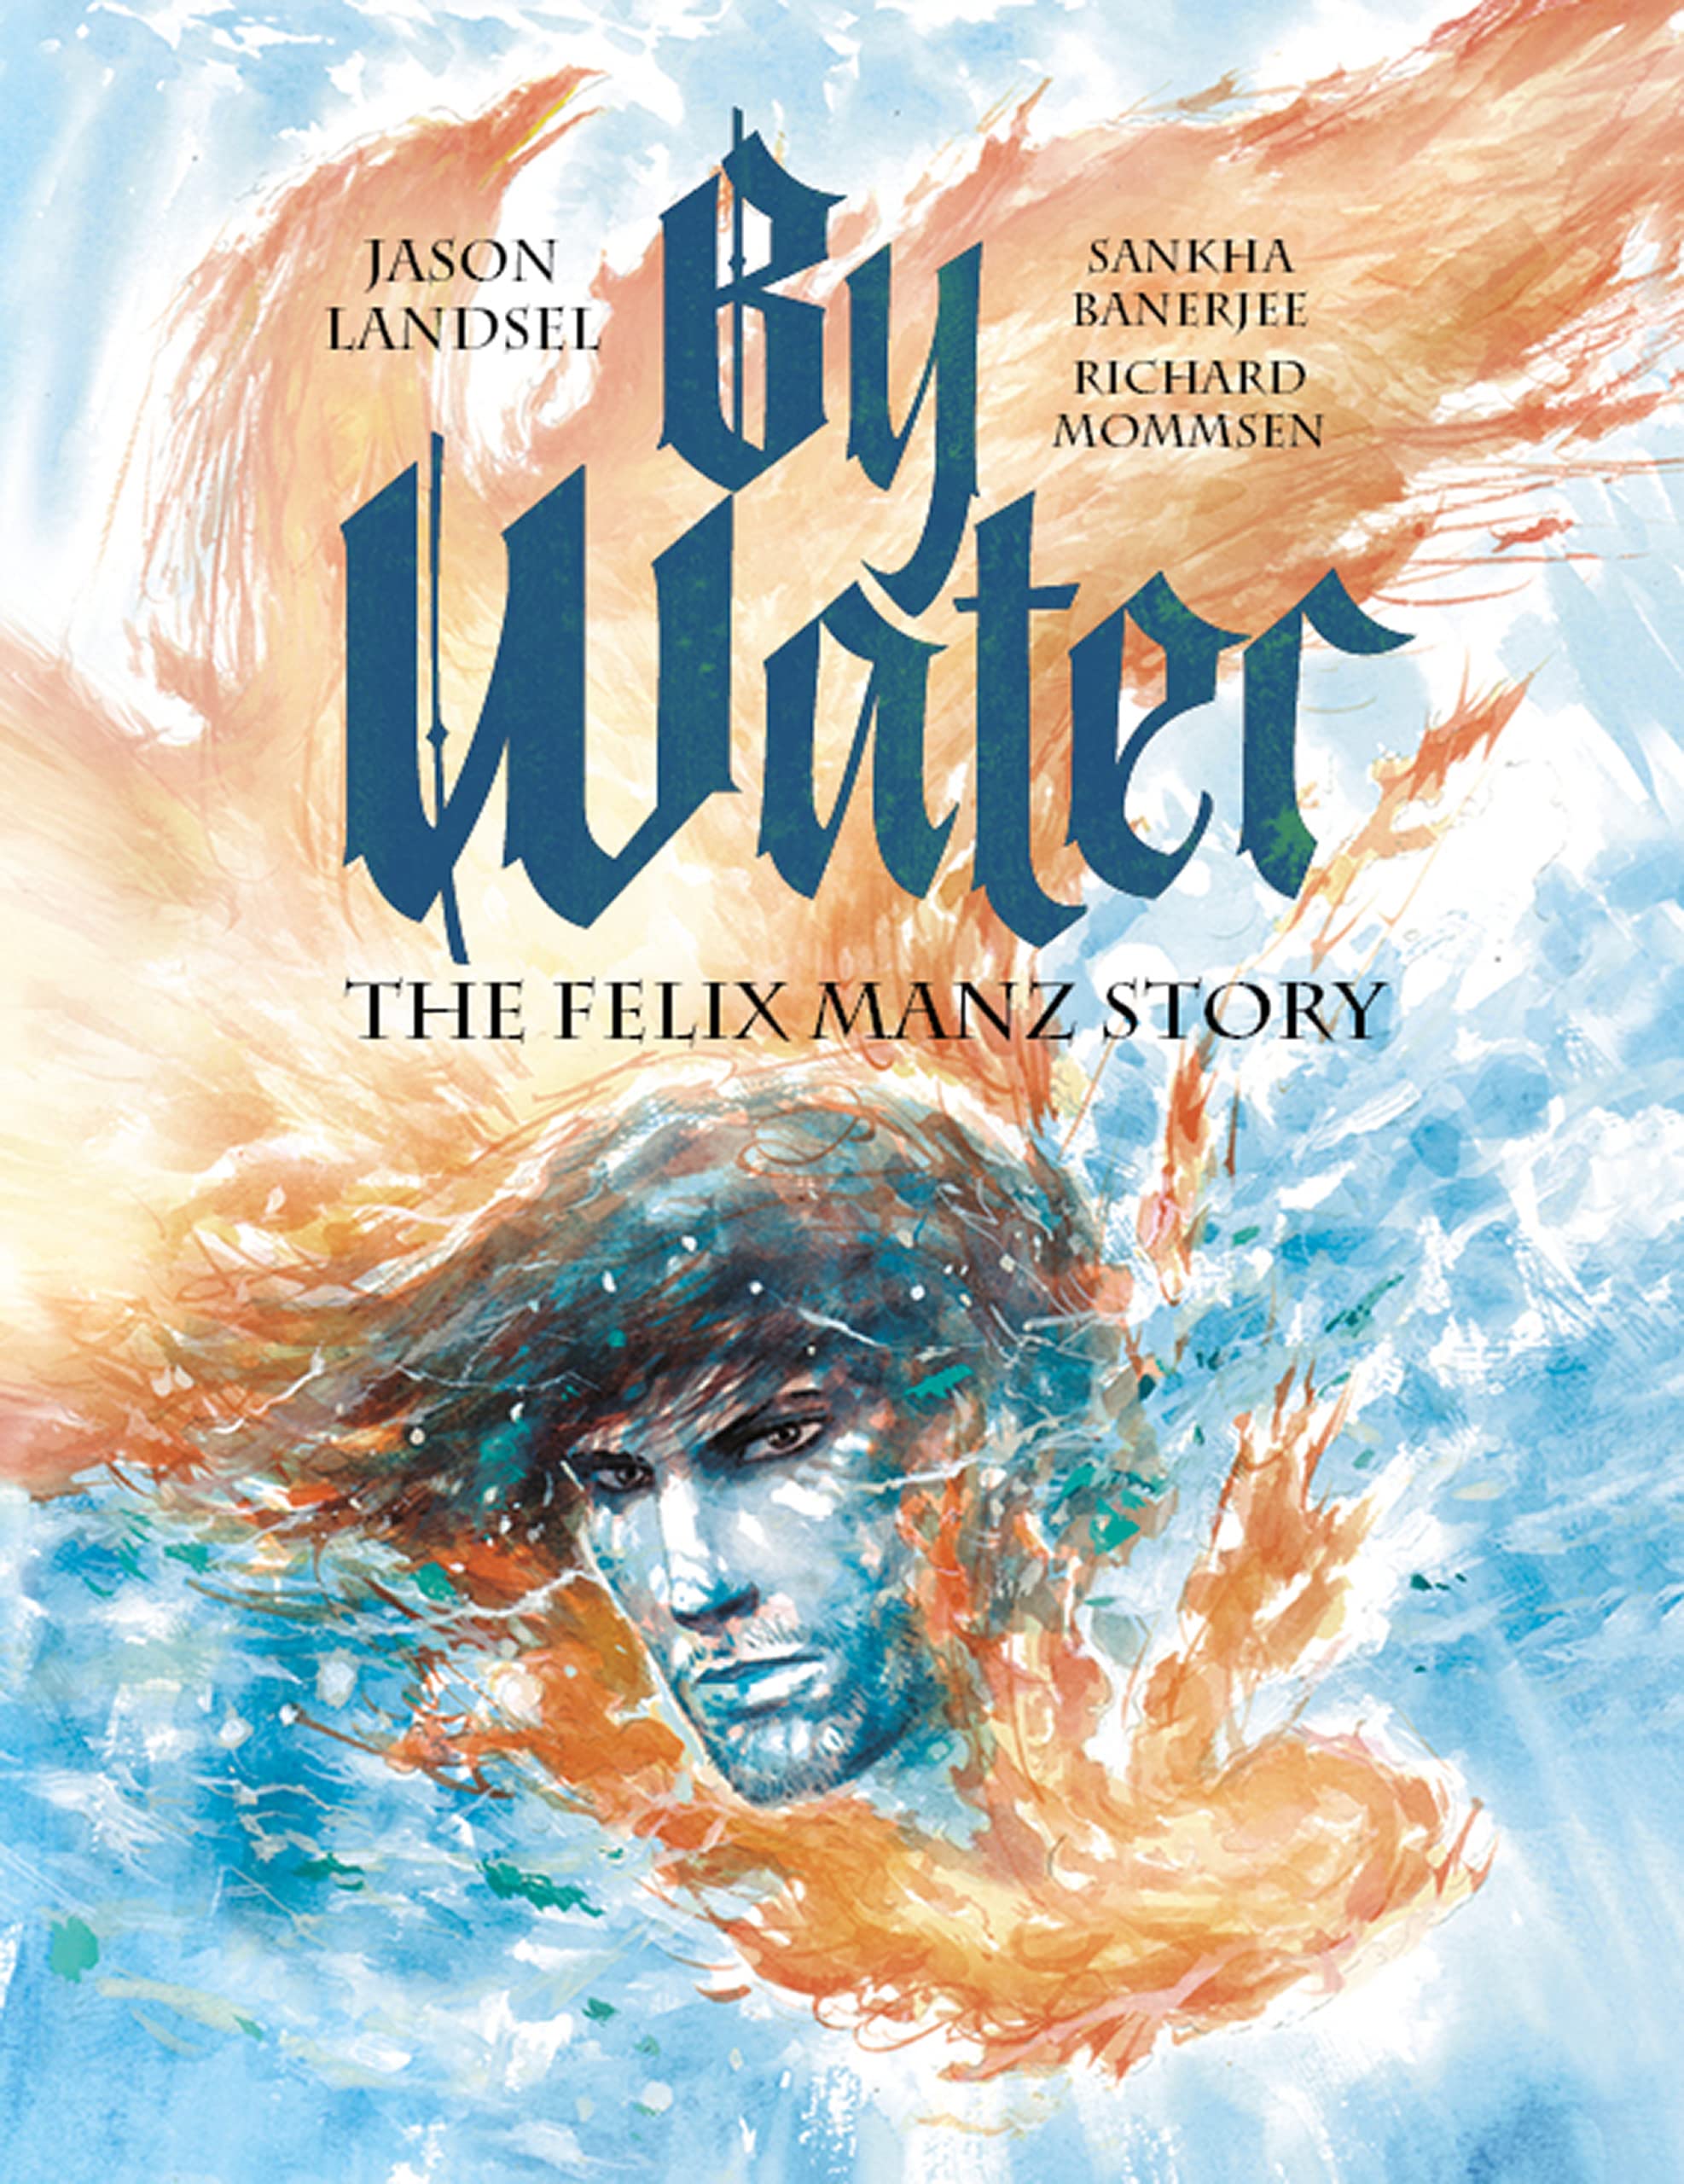 By Water: The Felix Manz Story